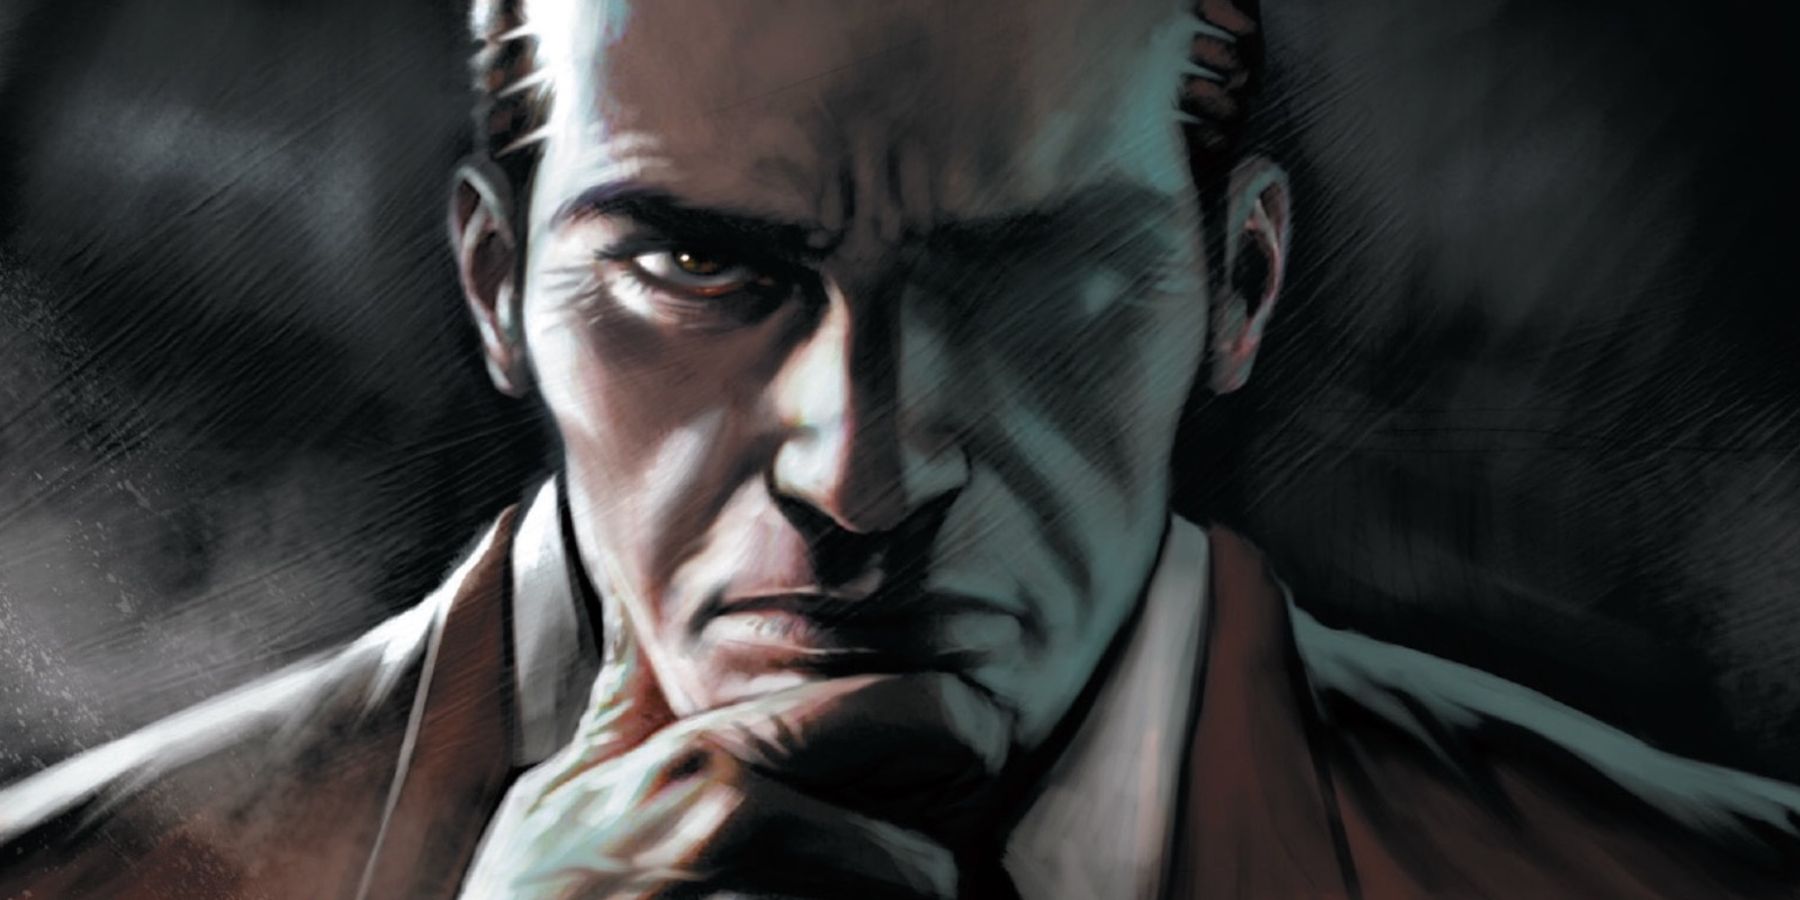 Norman Osborn sitting in his office in Spider-Man comics